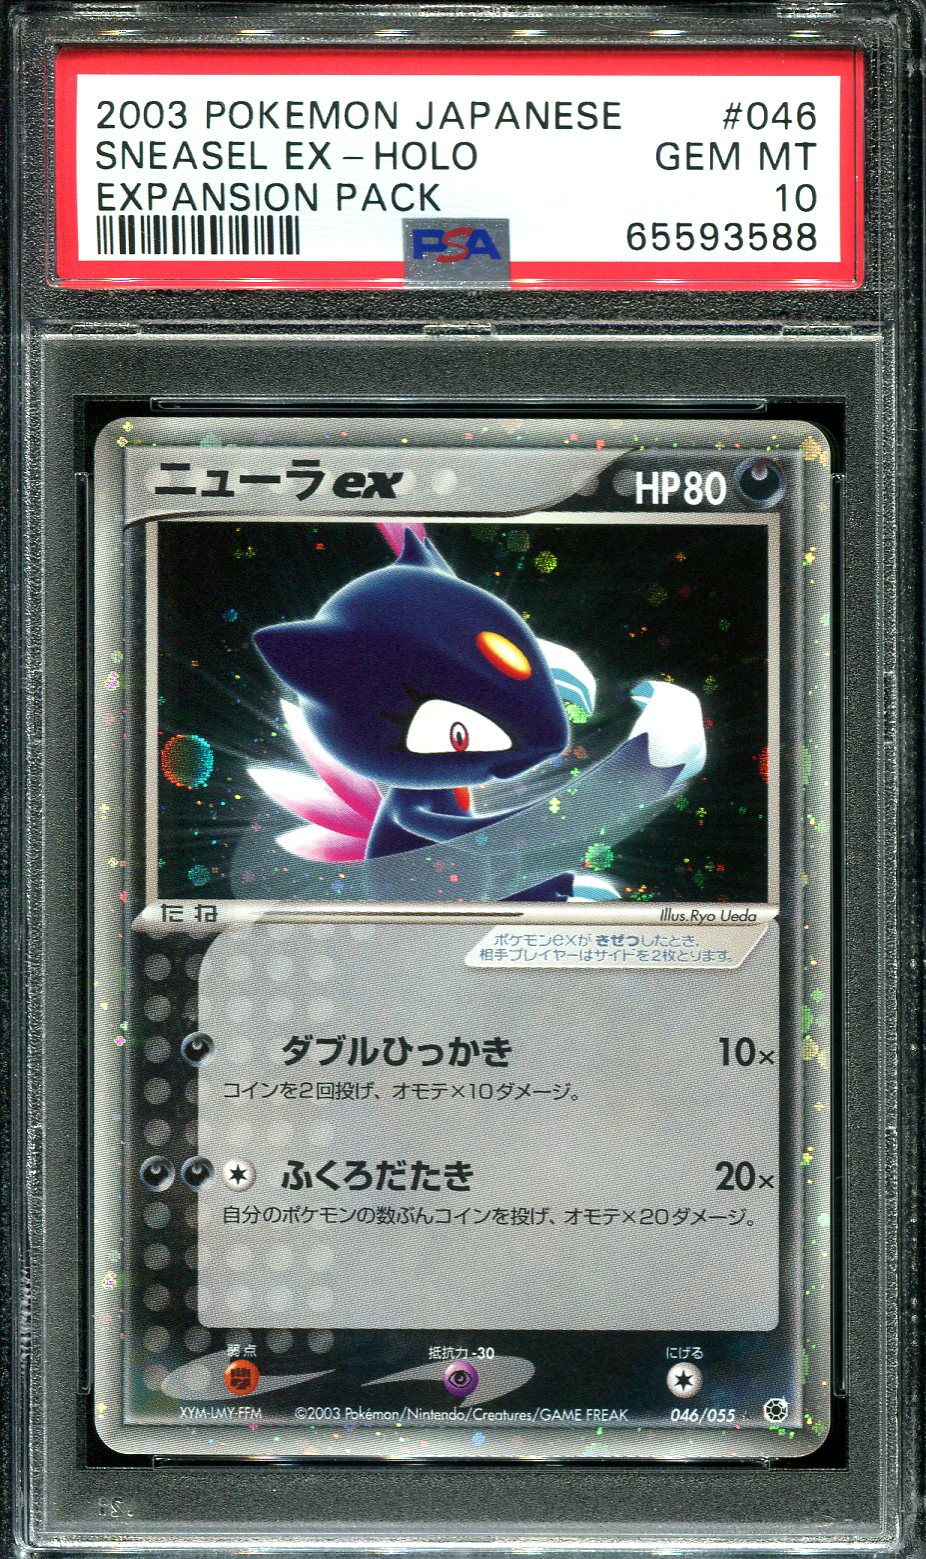 SNEASEL EX 046/055 PSA 10 POKEMON EXPANSION PACK JAPANESE HOLO